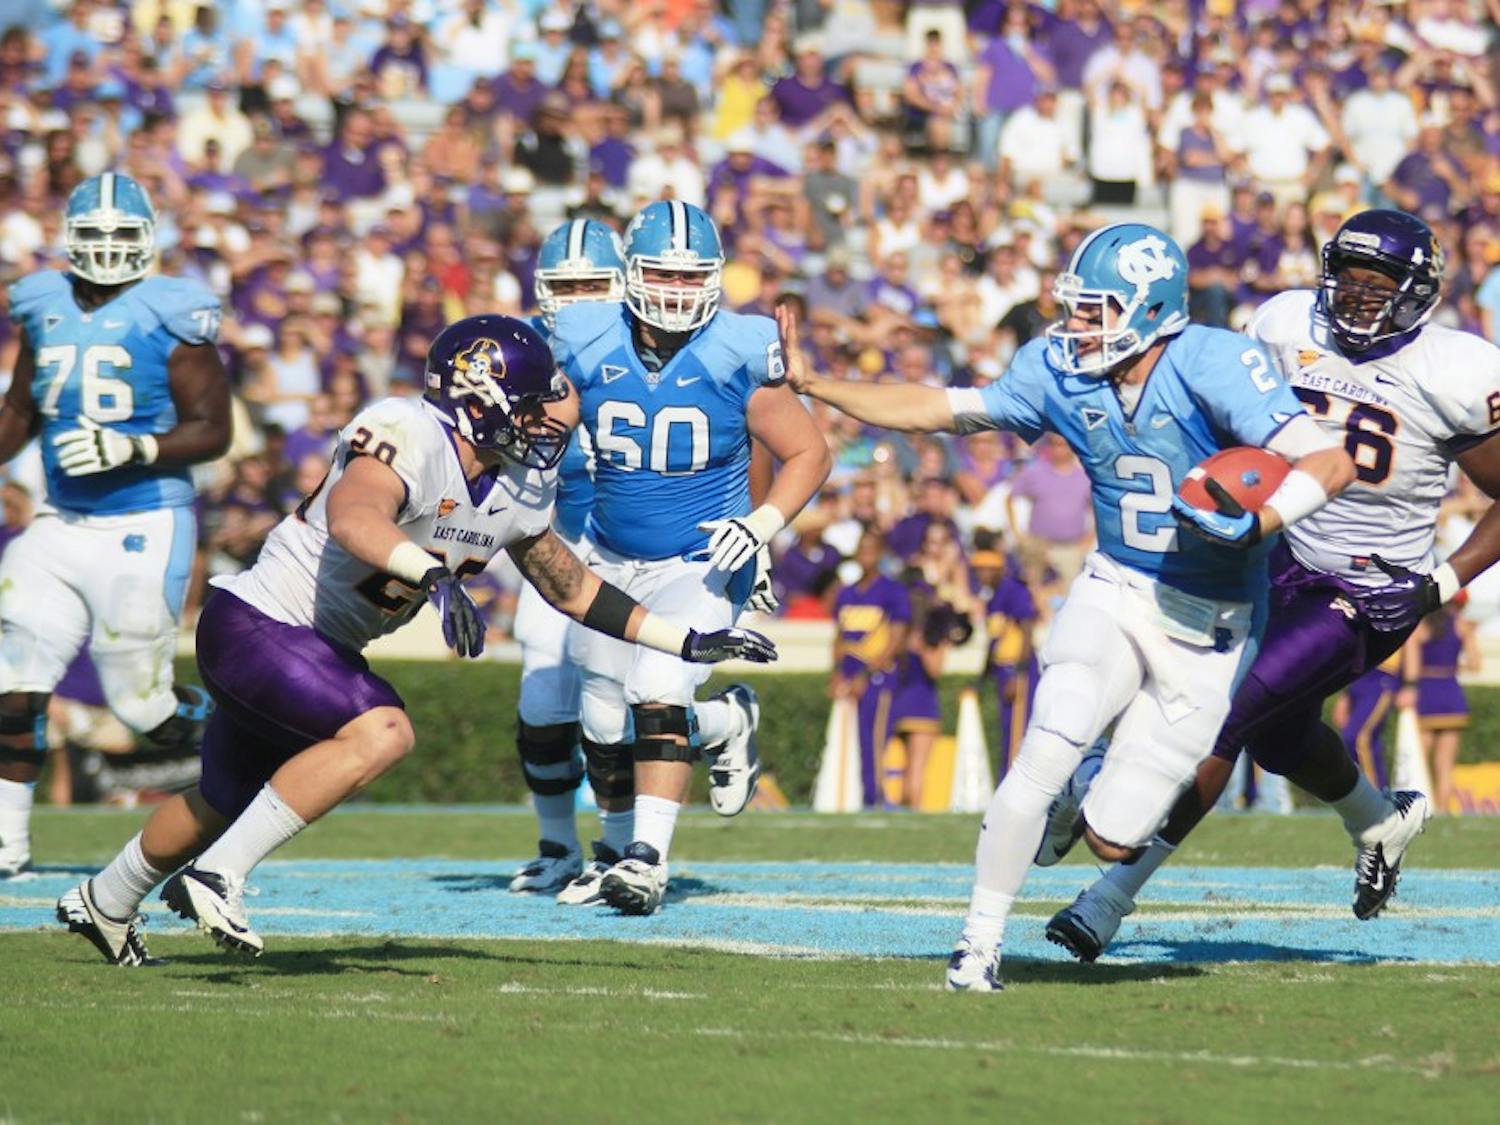 	UNC football plays against ECU on September 22, 2012. UNC won the game 27 to 6.